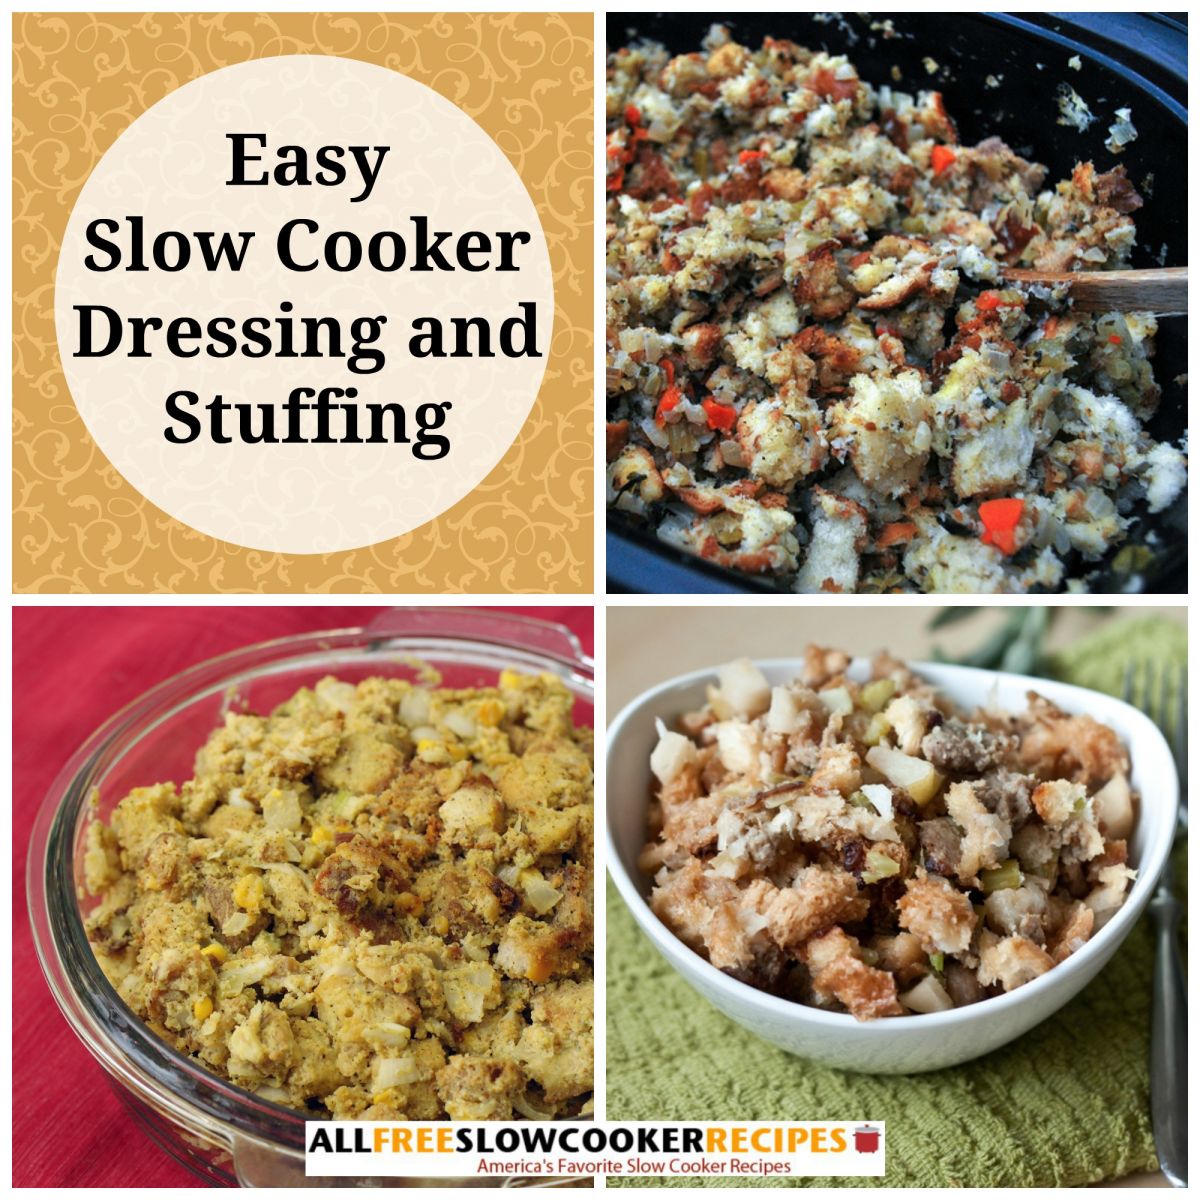 Slow Cooker Dressing and Stuffing Recipes